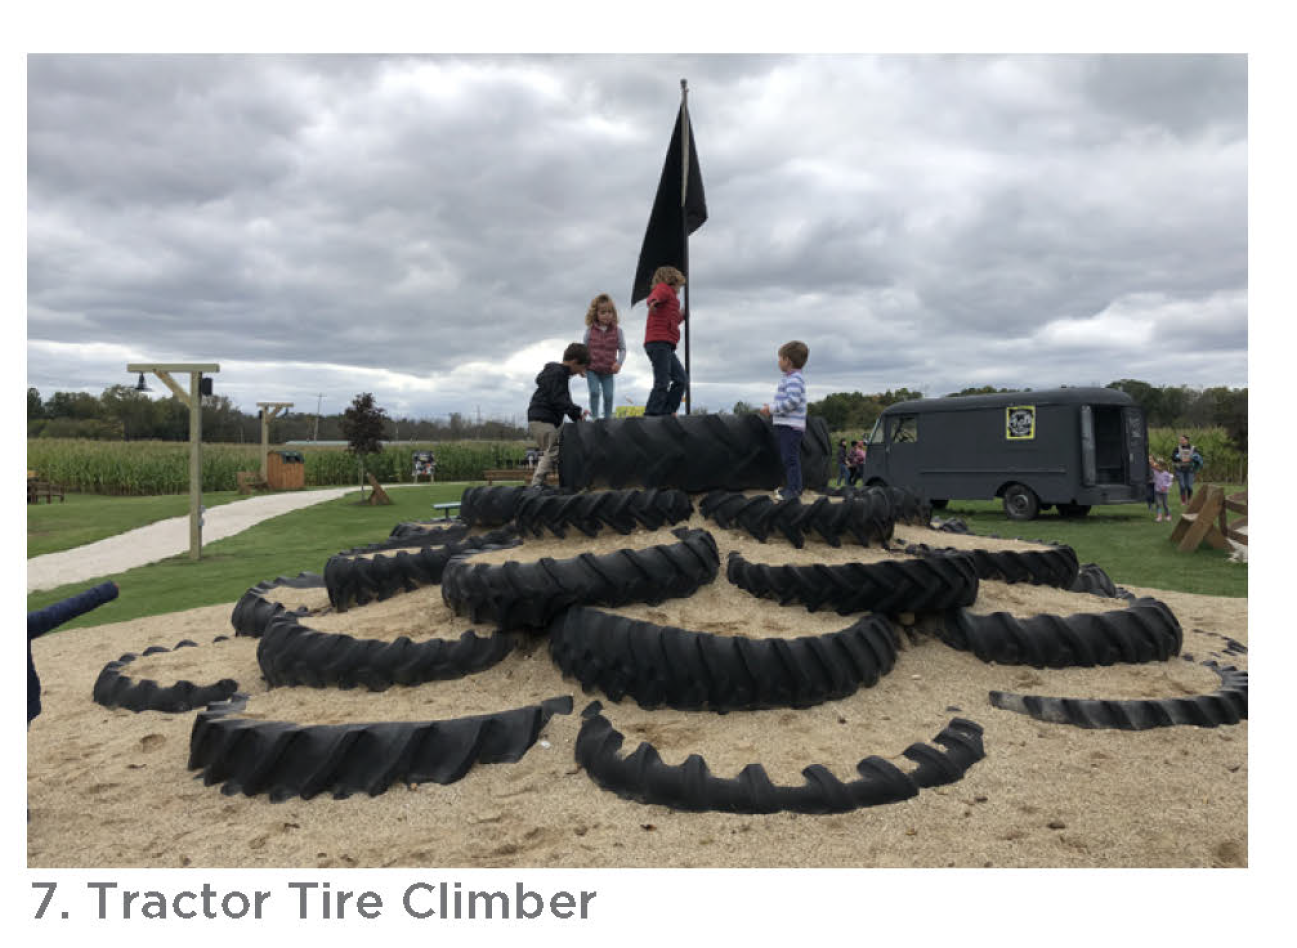 Tractor Tire Climber